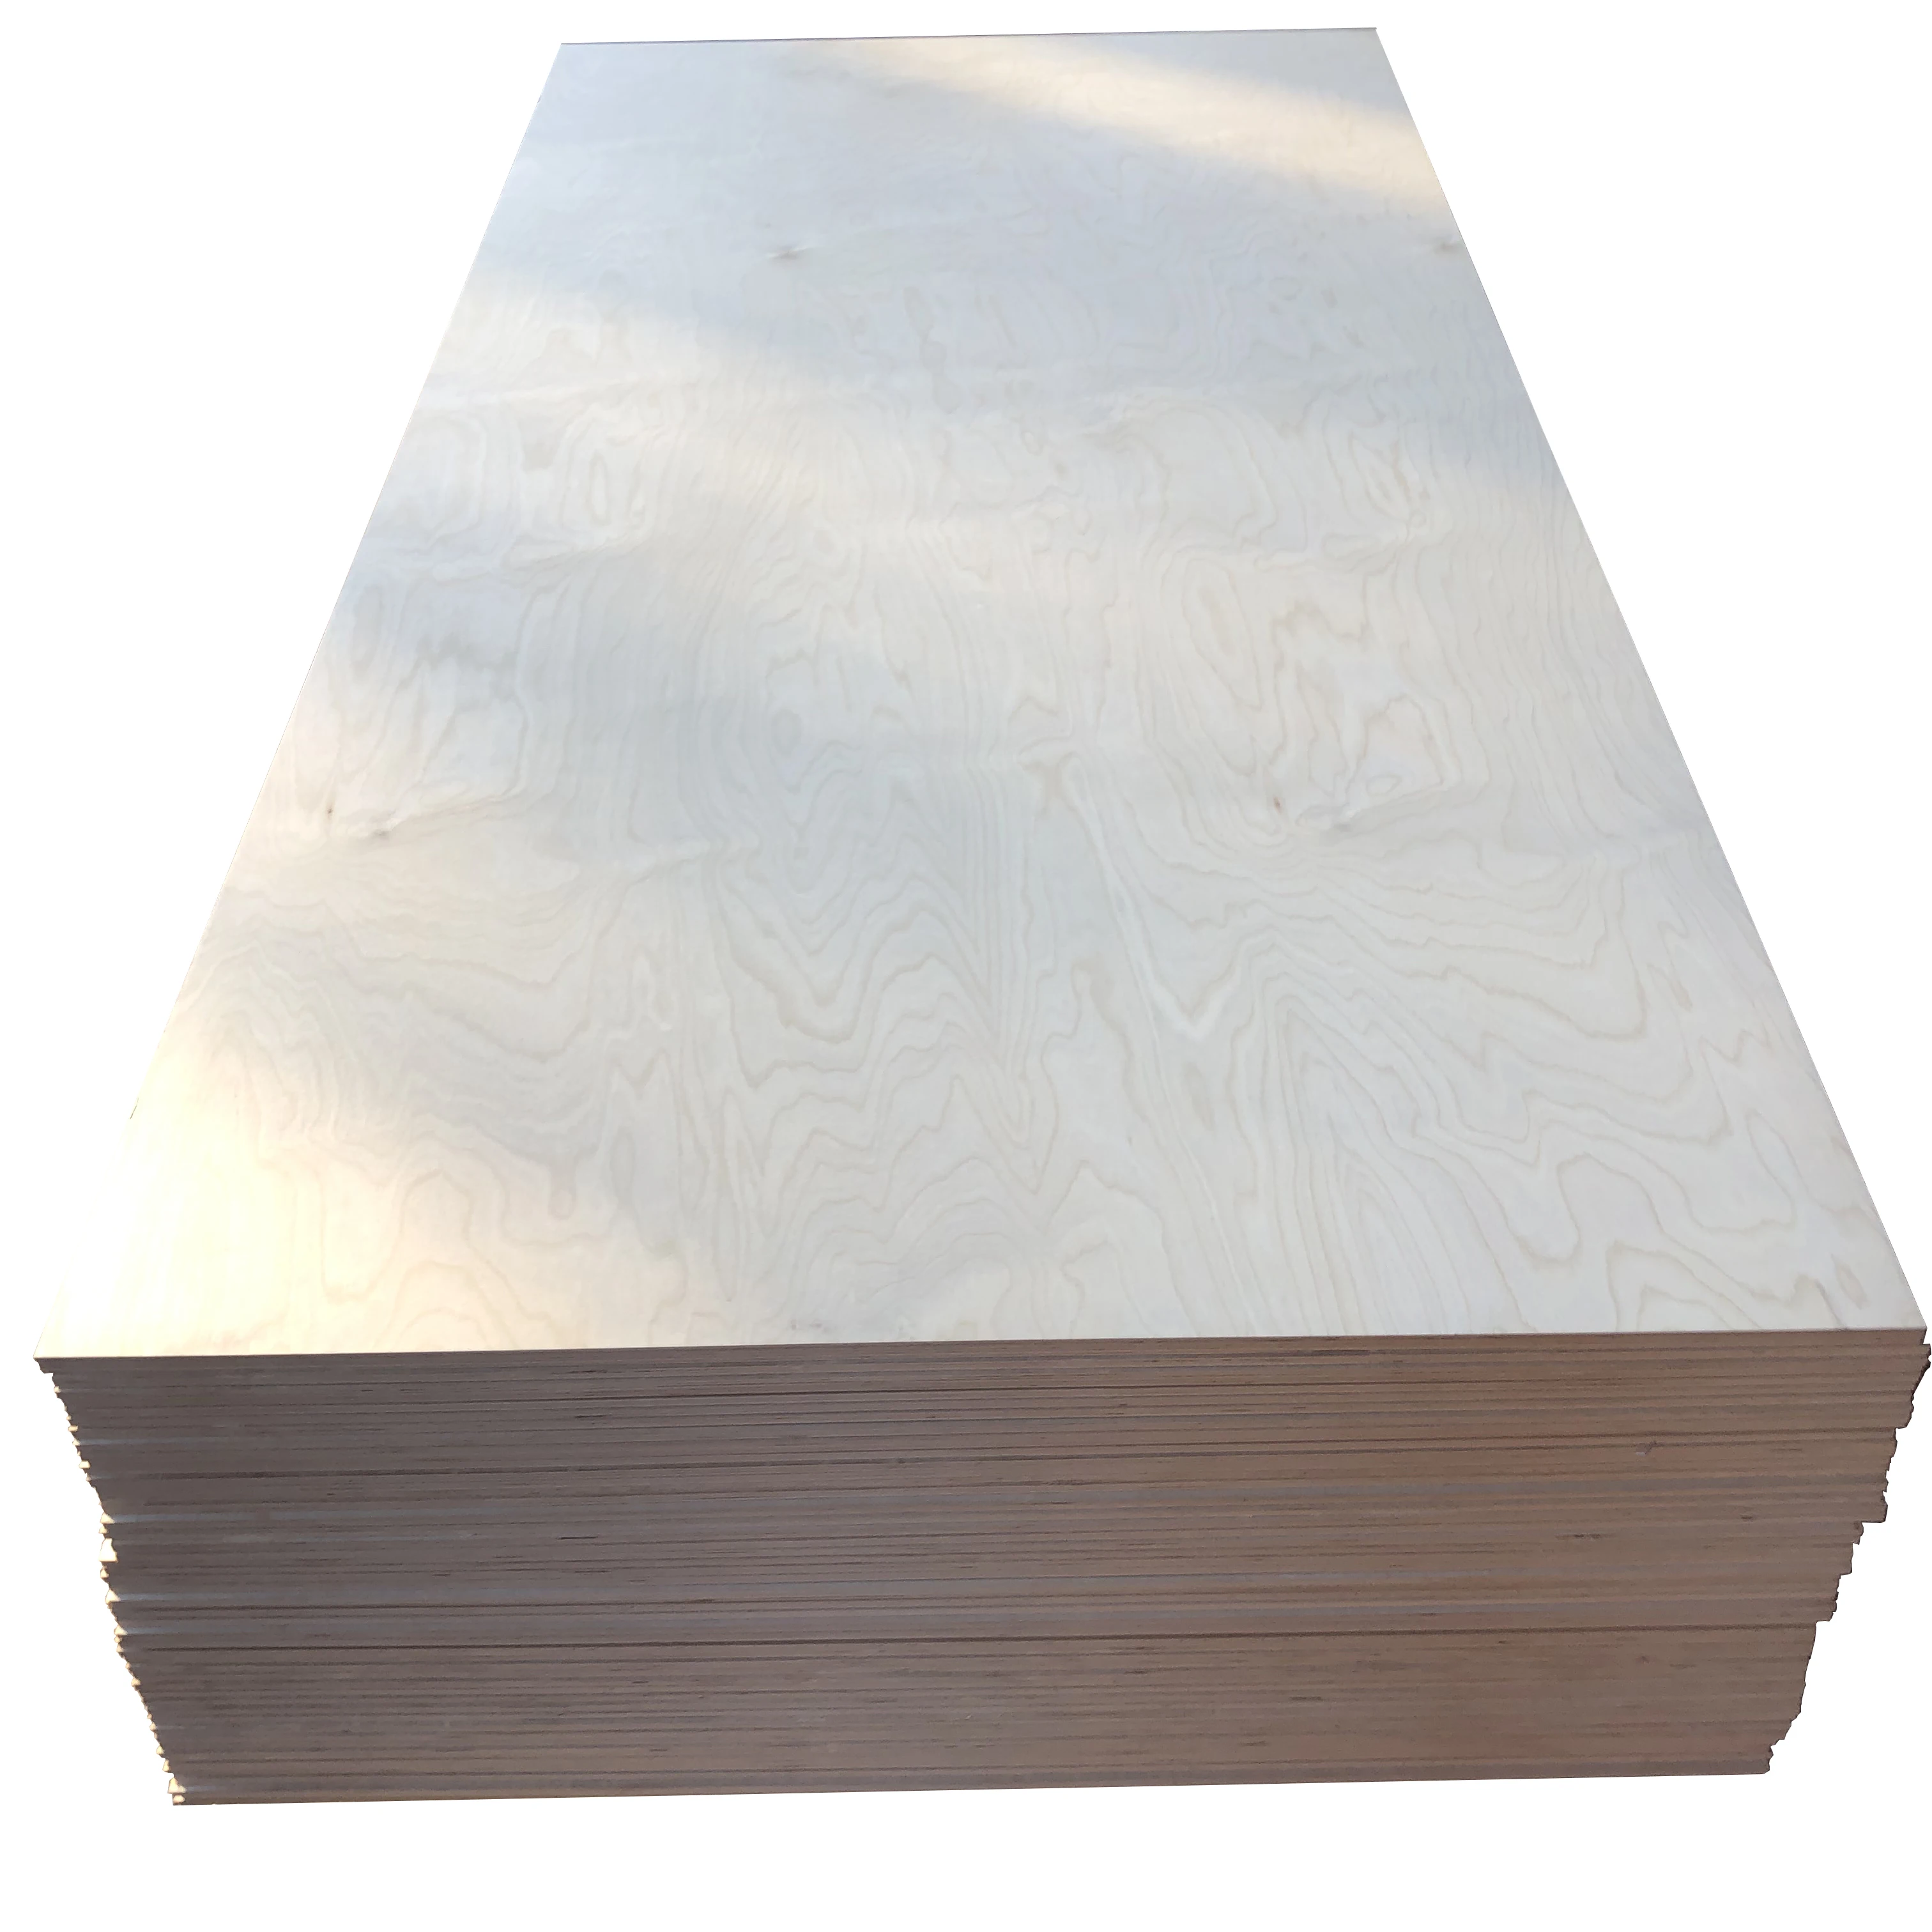 Factory price baltic birch plywood 3mm 12mm 18mm full birch commercial plywood birch sheets (1600570189293)